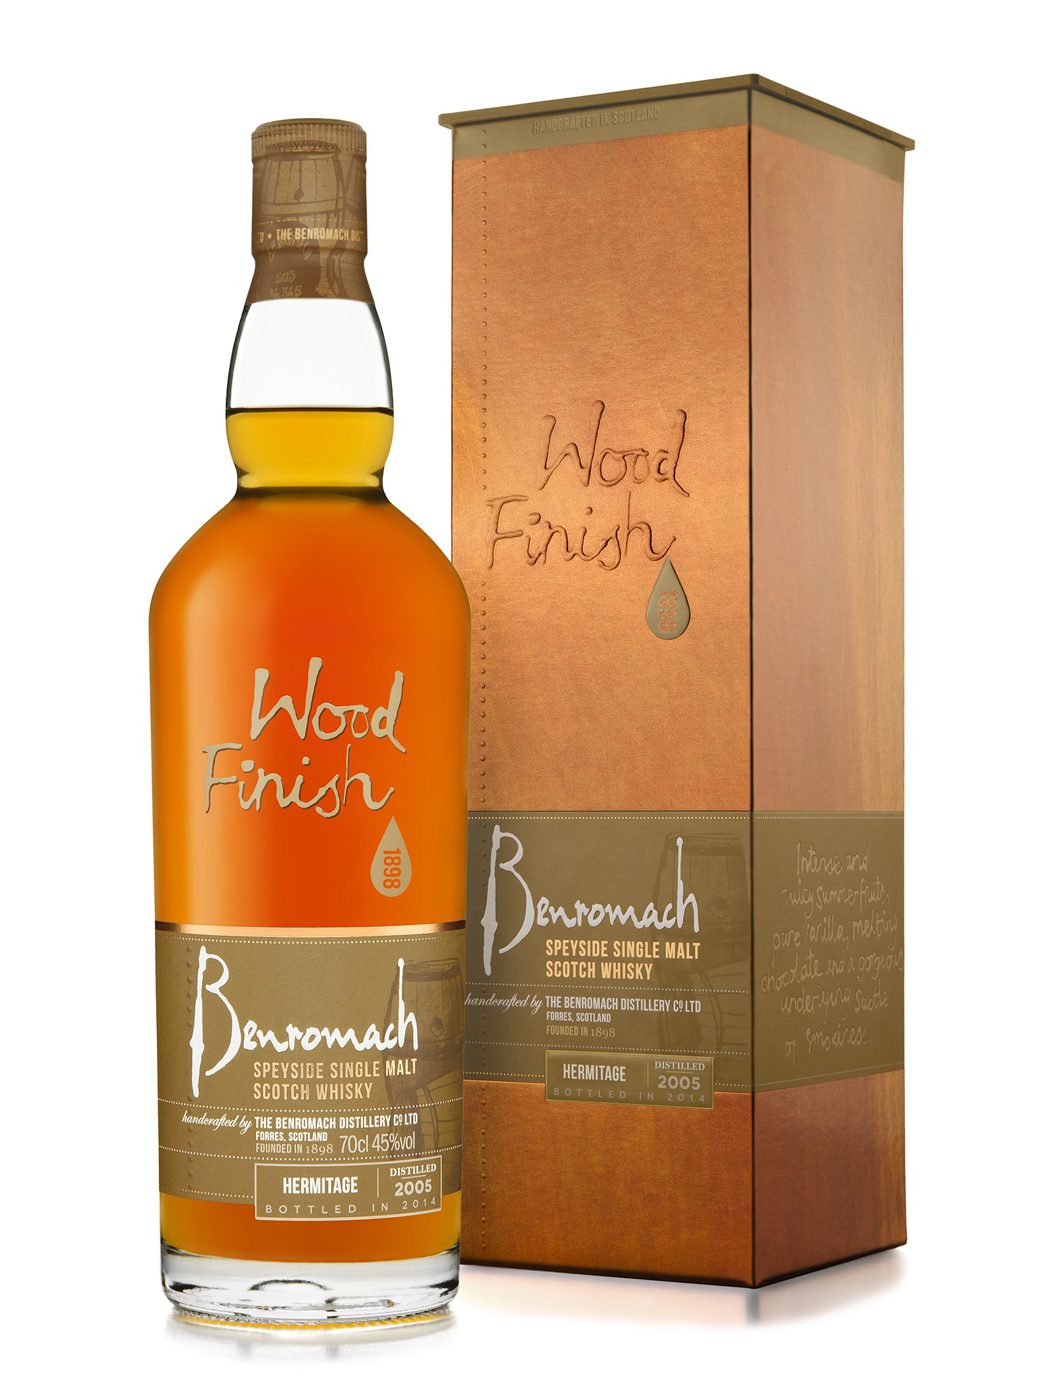 Picture: Benromach